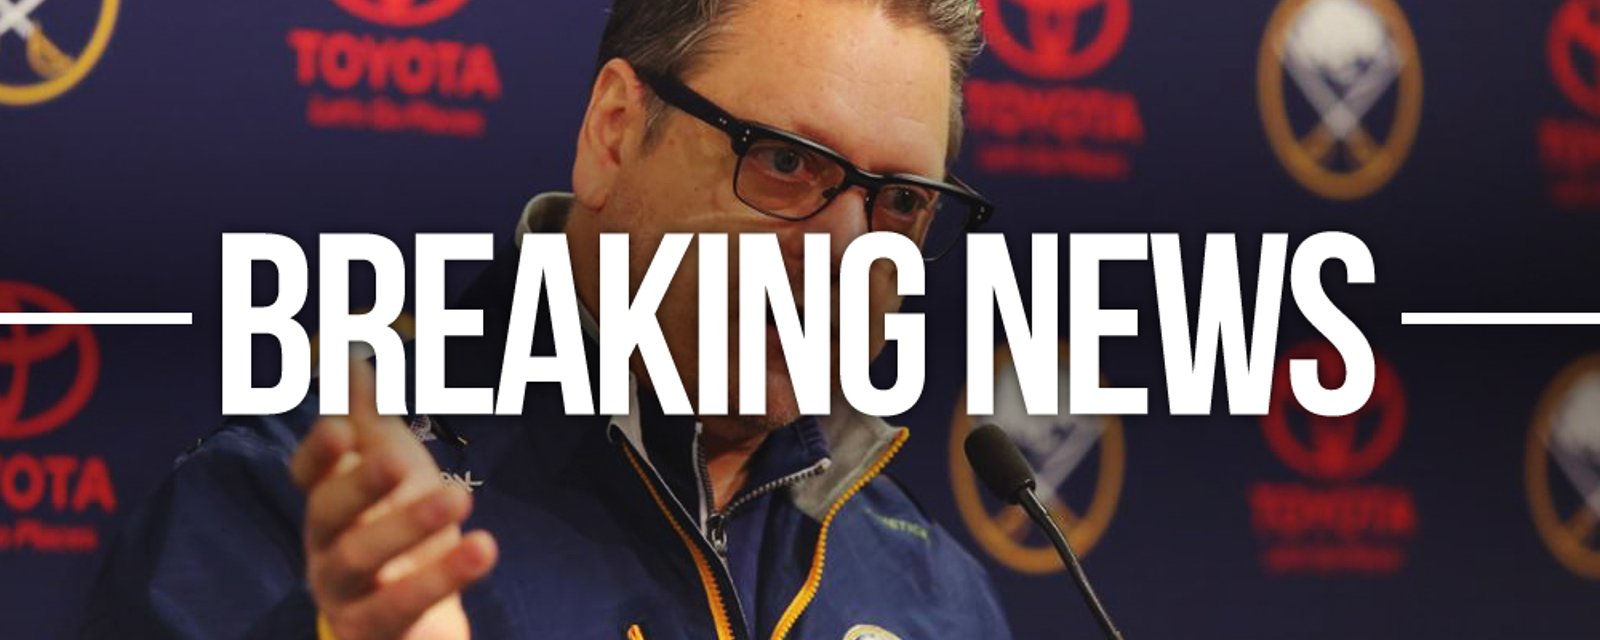 BREAKING: Former head coach reportedly turned down two NHL jobs.